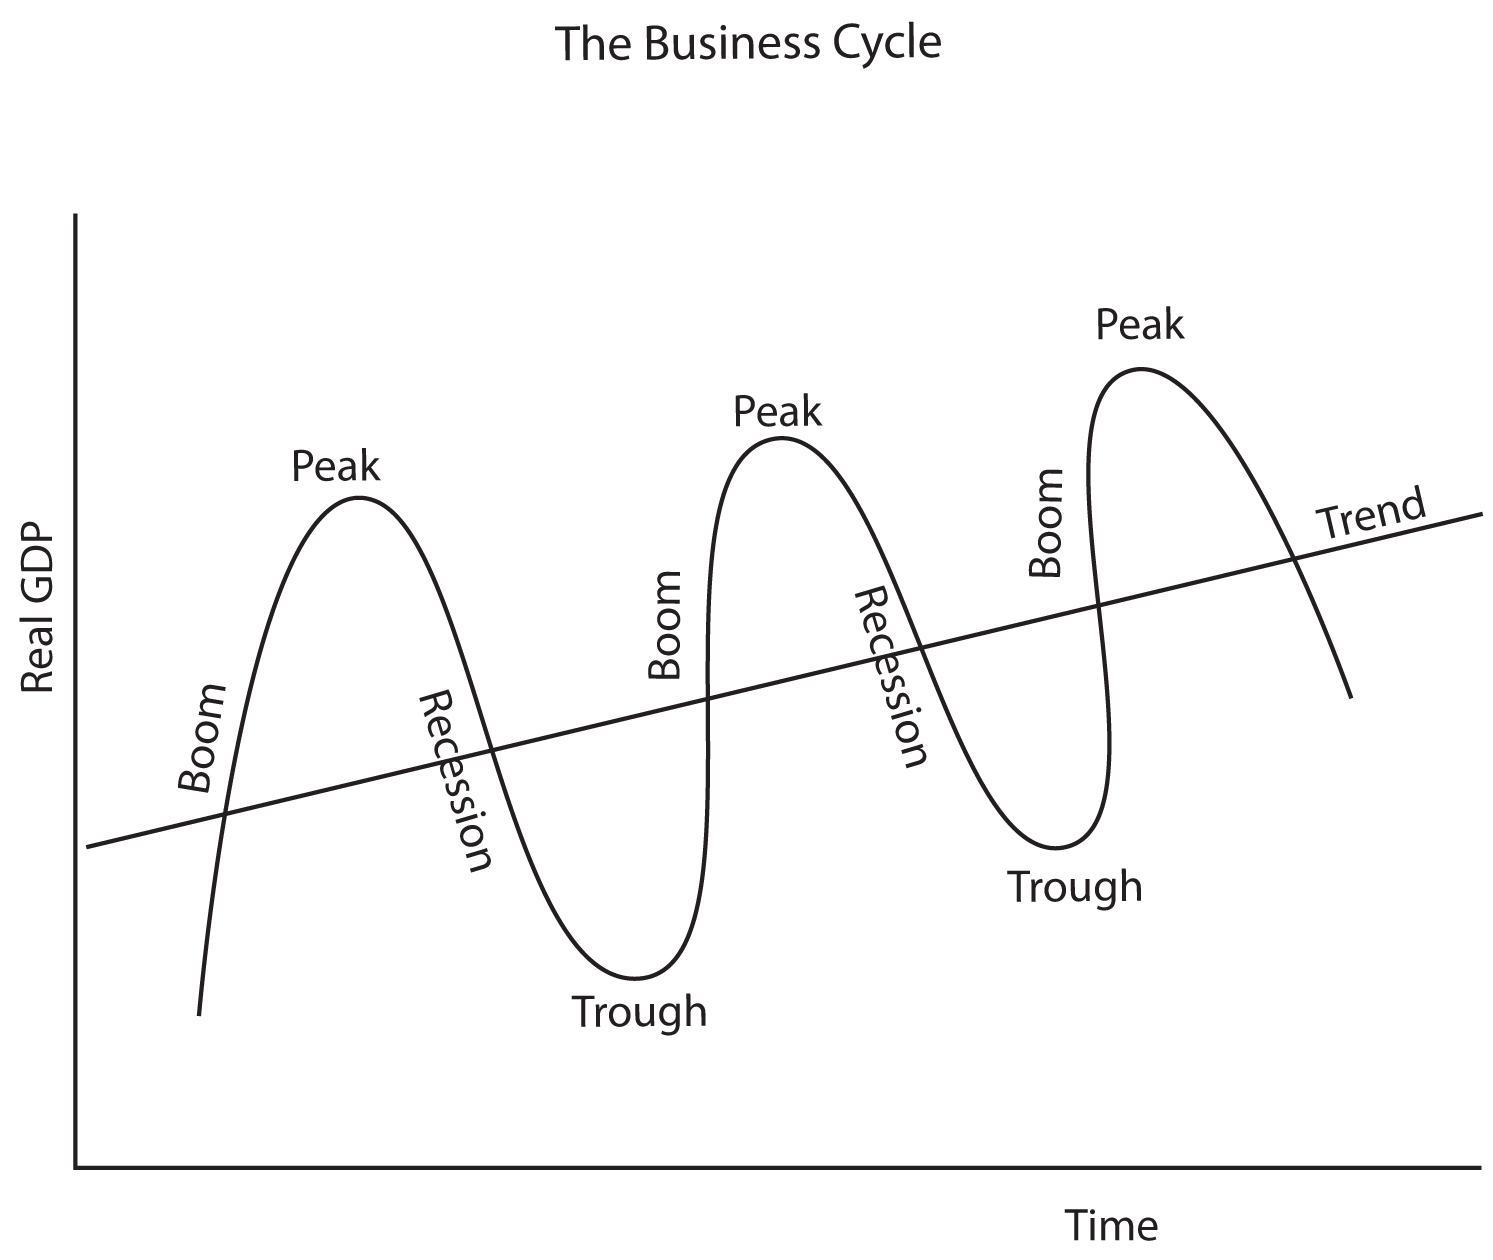 <p>Observing GDP as it goes through cycles; captures cyclical nature of GDP expansion</p>